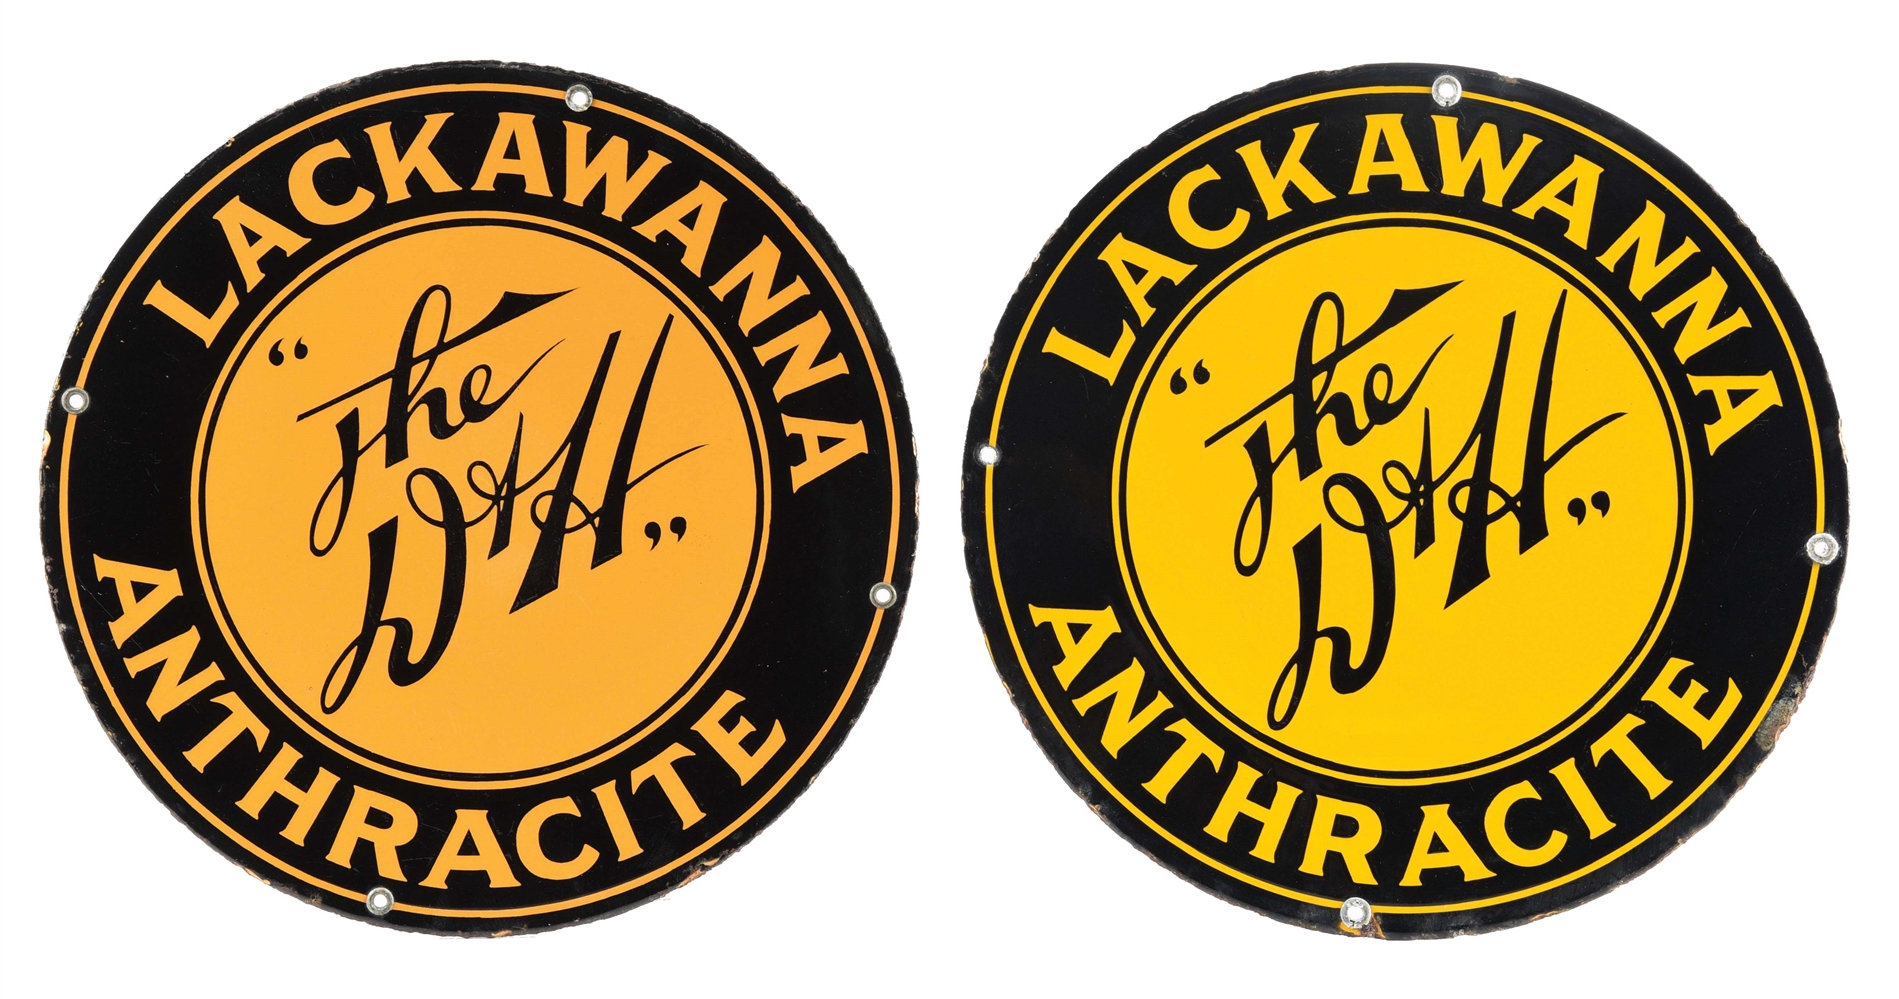 COLLECTION OF 2 D & H RAILWAY LACKAWANNA ANTHRACITE PORCELAIN SIGNS.